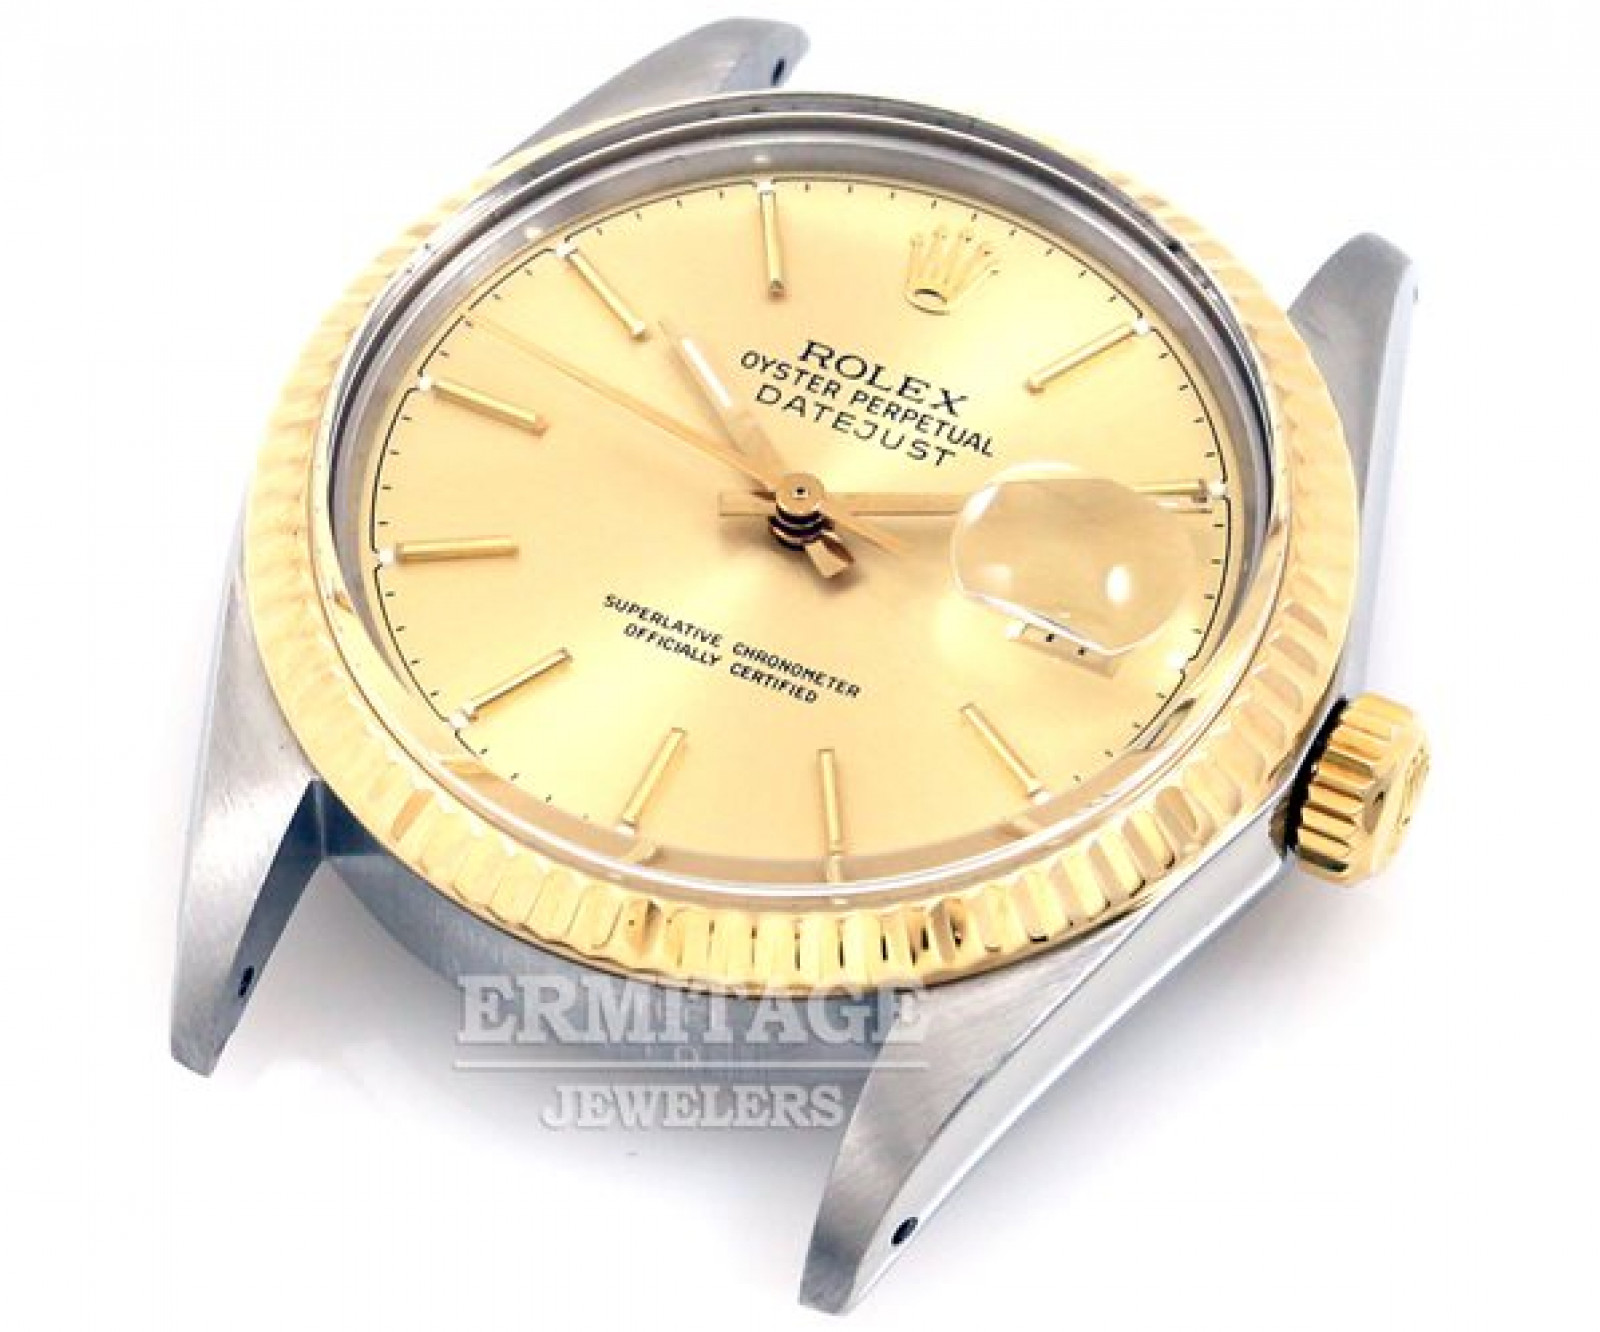 Pre-Owned Gold & Steel Rolex Datejust 16013